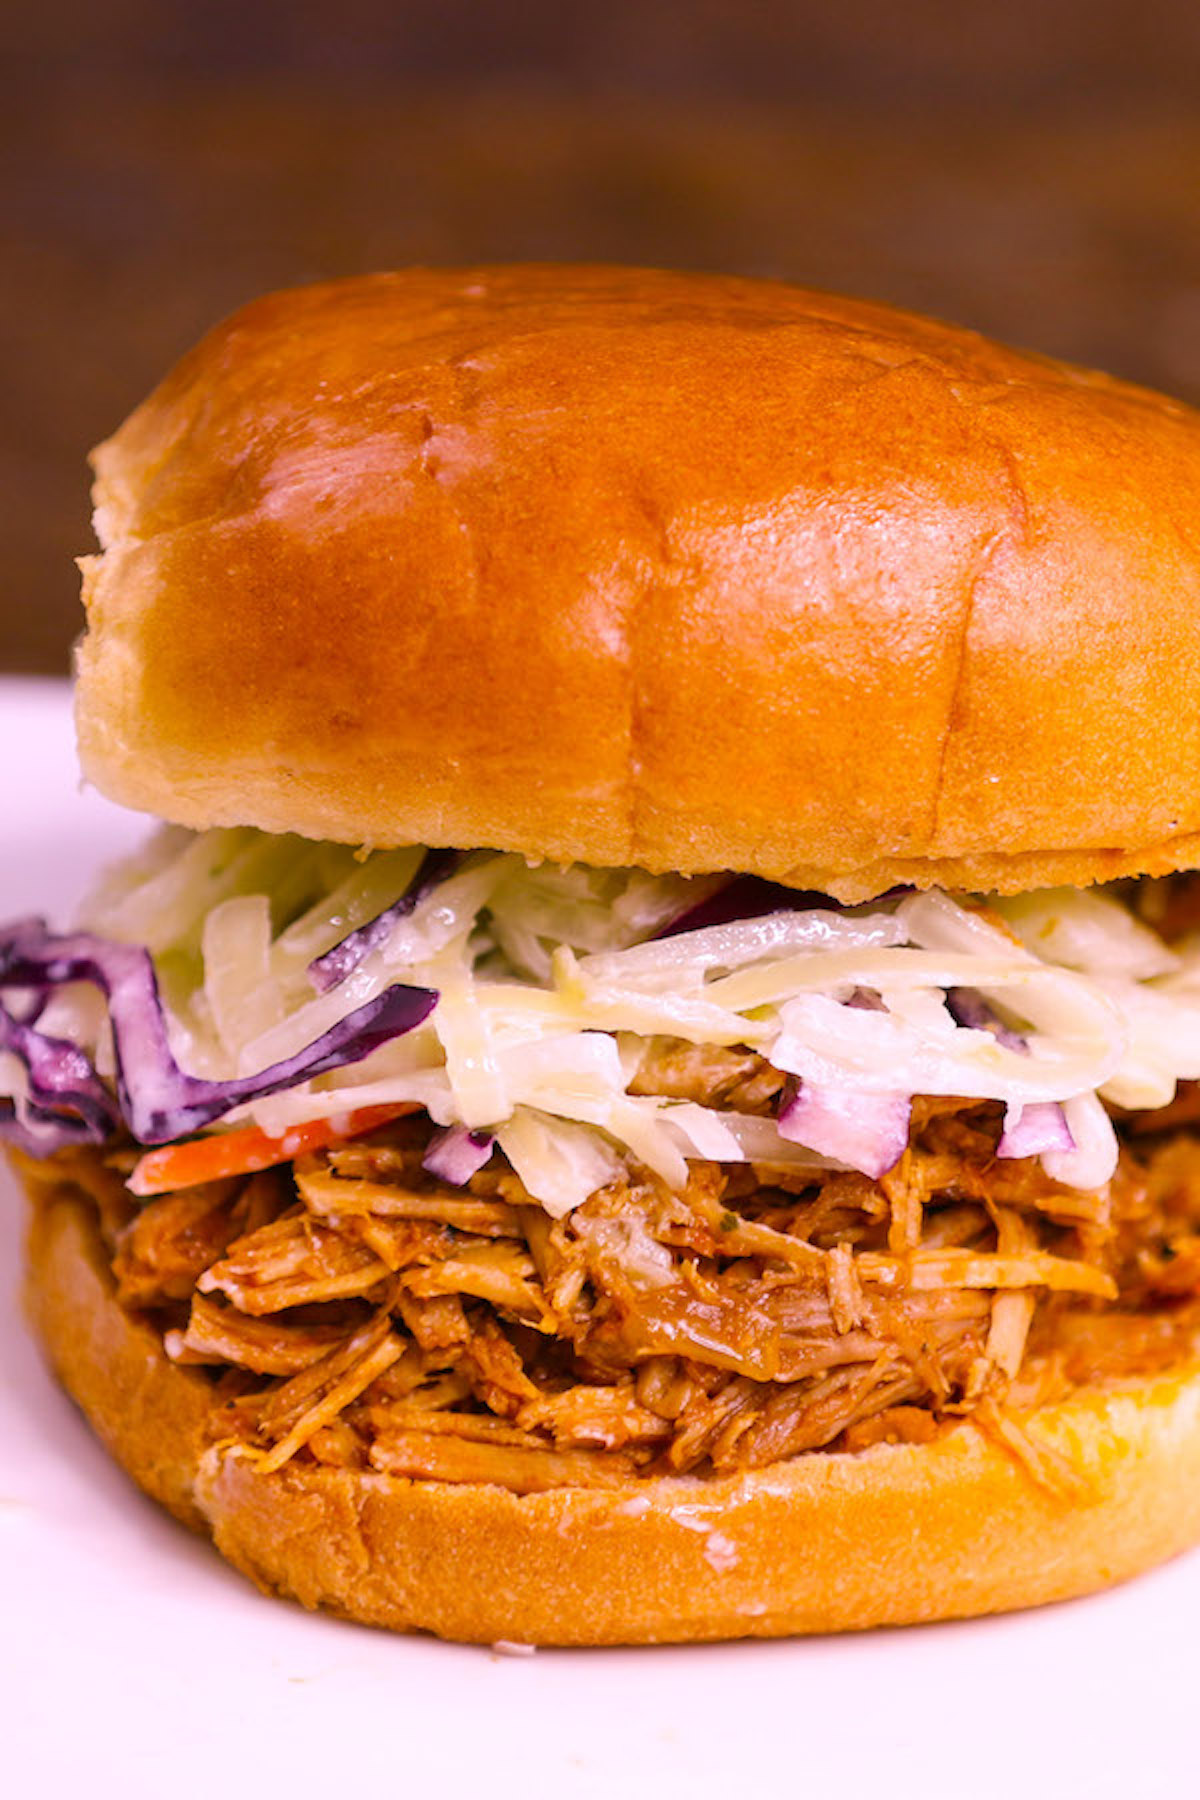 Pulled pork is incredibly easy to make at home and can be used in a variety of delicious recipes. It makes an excellent meal prep ingredient because it can be made ahead of time and frozen. Not sure what to do with all that leftover? You’ll have plenty of inspiration with this list of delicious Leftover Pulled Pork Recipes below.